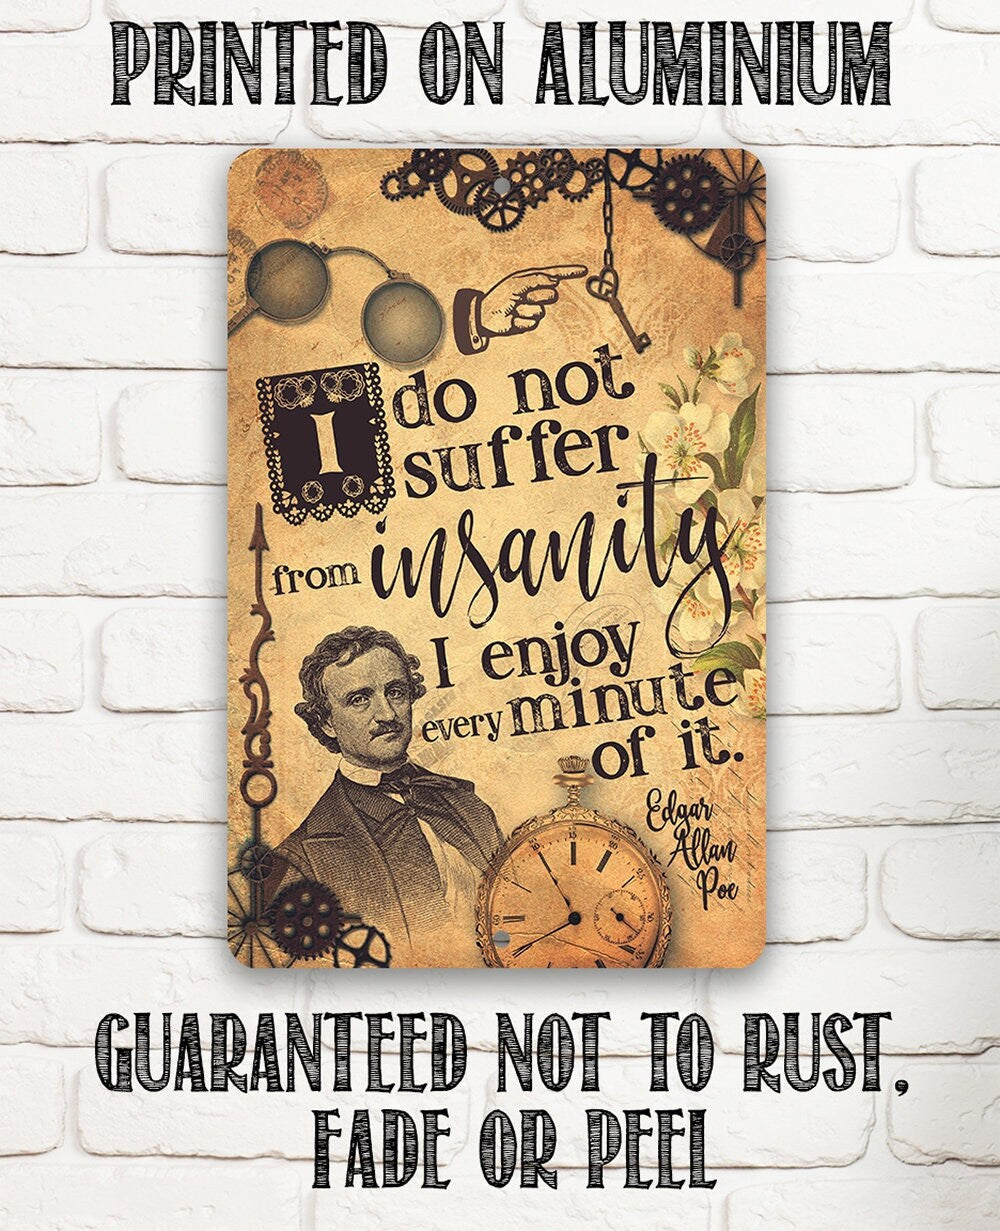 I Do Not Suffer From Insanity, I Enjoy Every Minute Of It - Edgar Allan Poe 8" x 12" or 12" x 18" Aluminum Tin Awesome Metal Poster Lone Star Art 